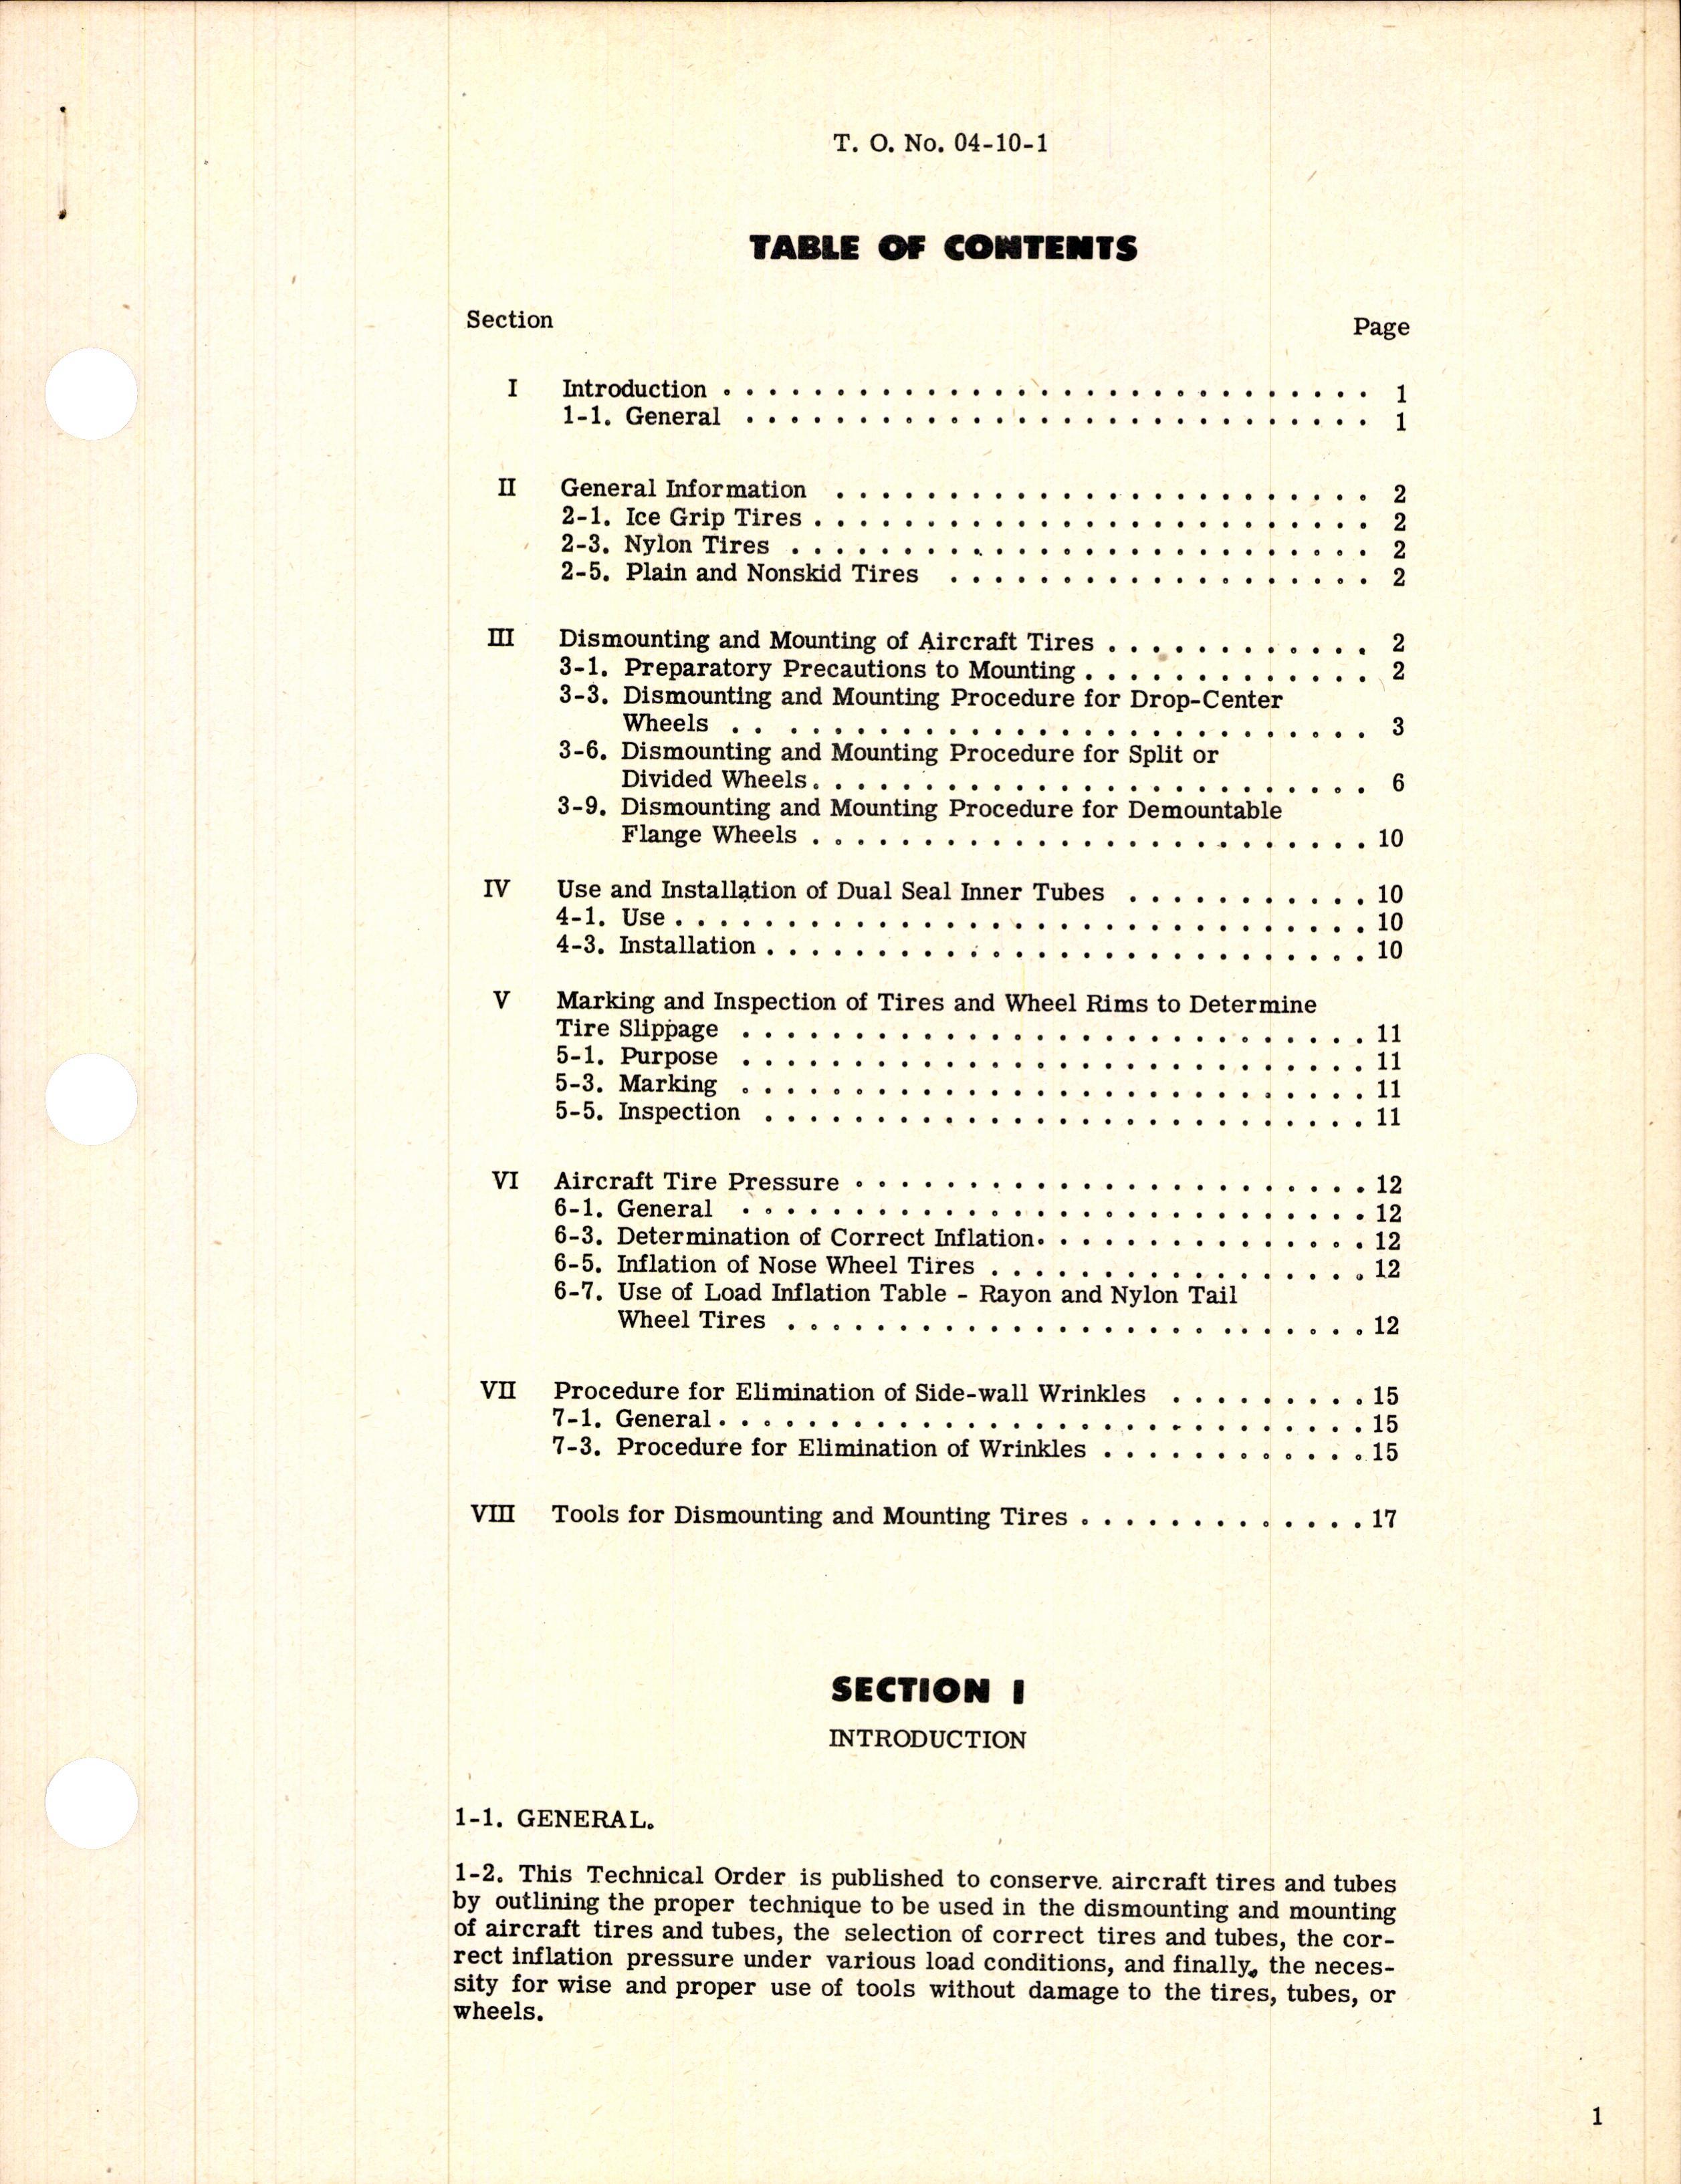 Sample page 3 from AirCorps Library document: Dismounting, Mounting, and Inflation of Aircraft Tires and Tubes